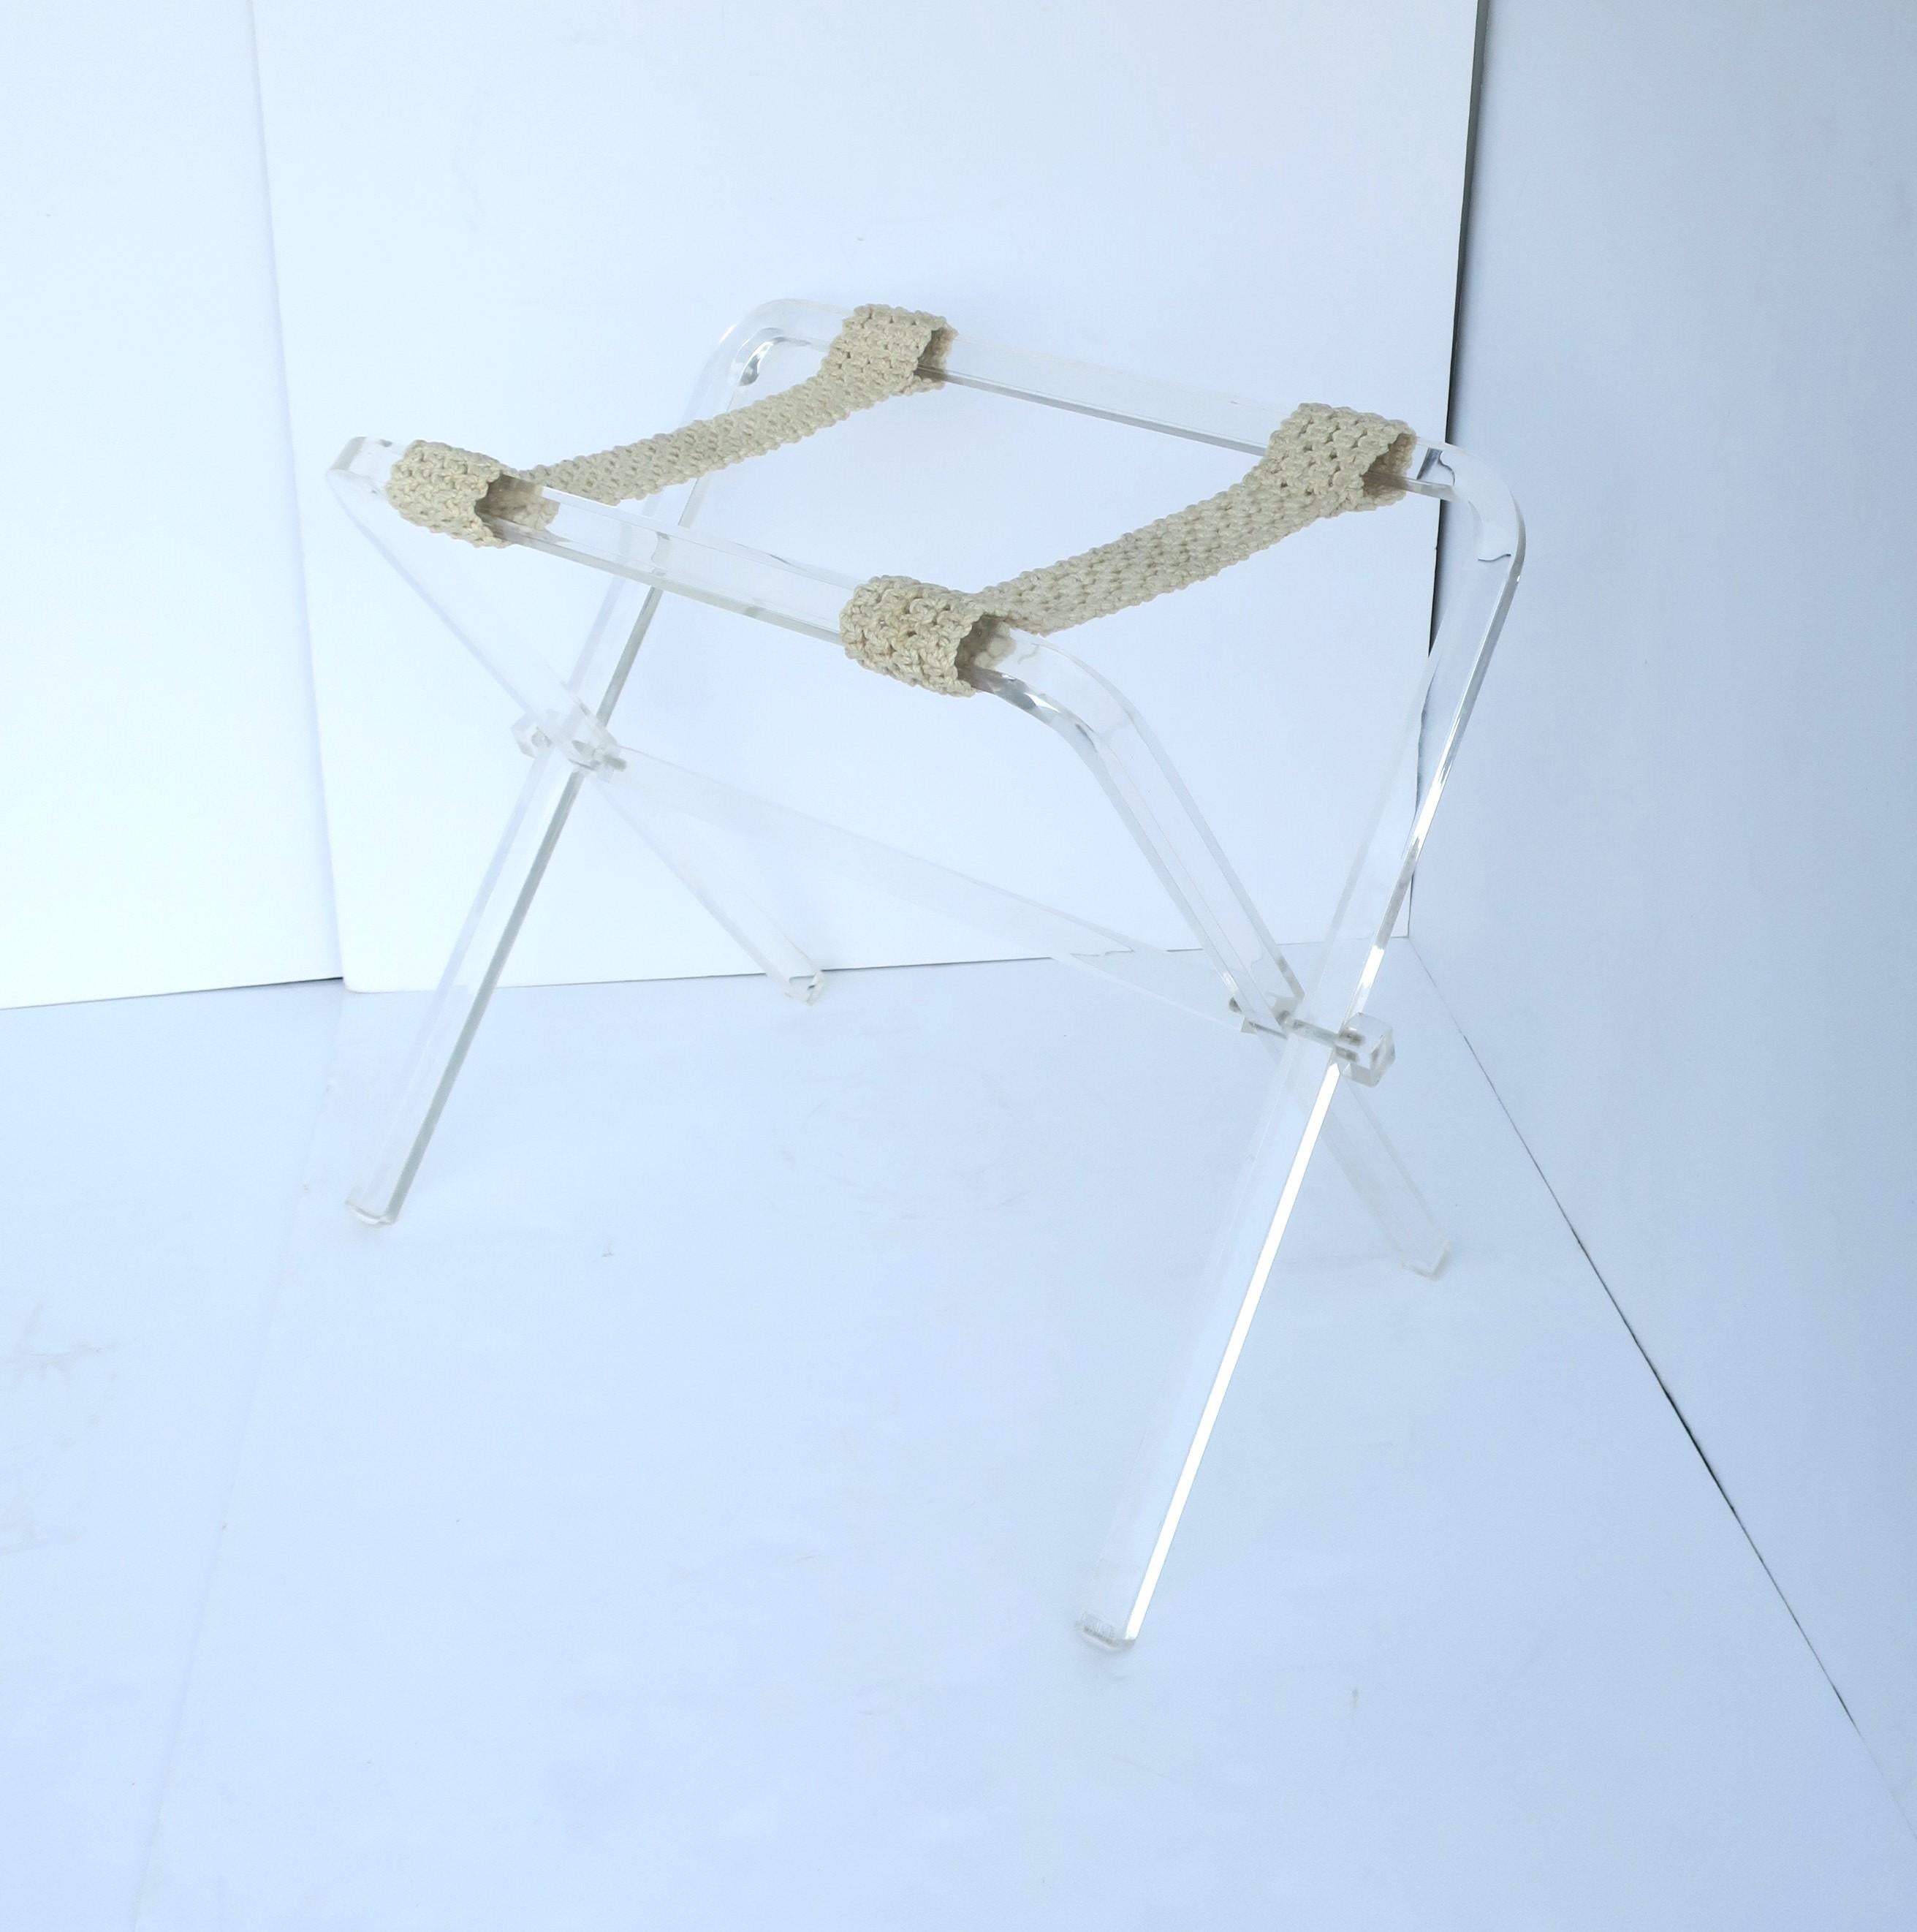 A lucite luggage rack with ivory straps in the Hollywood Regency style, circa late-20th century. Piece neatly folds up as shown in last image. 

Dimensions: 16.25